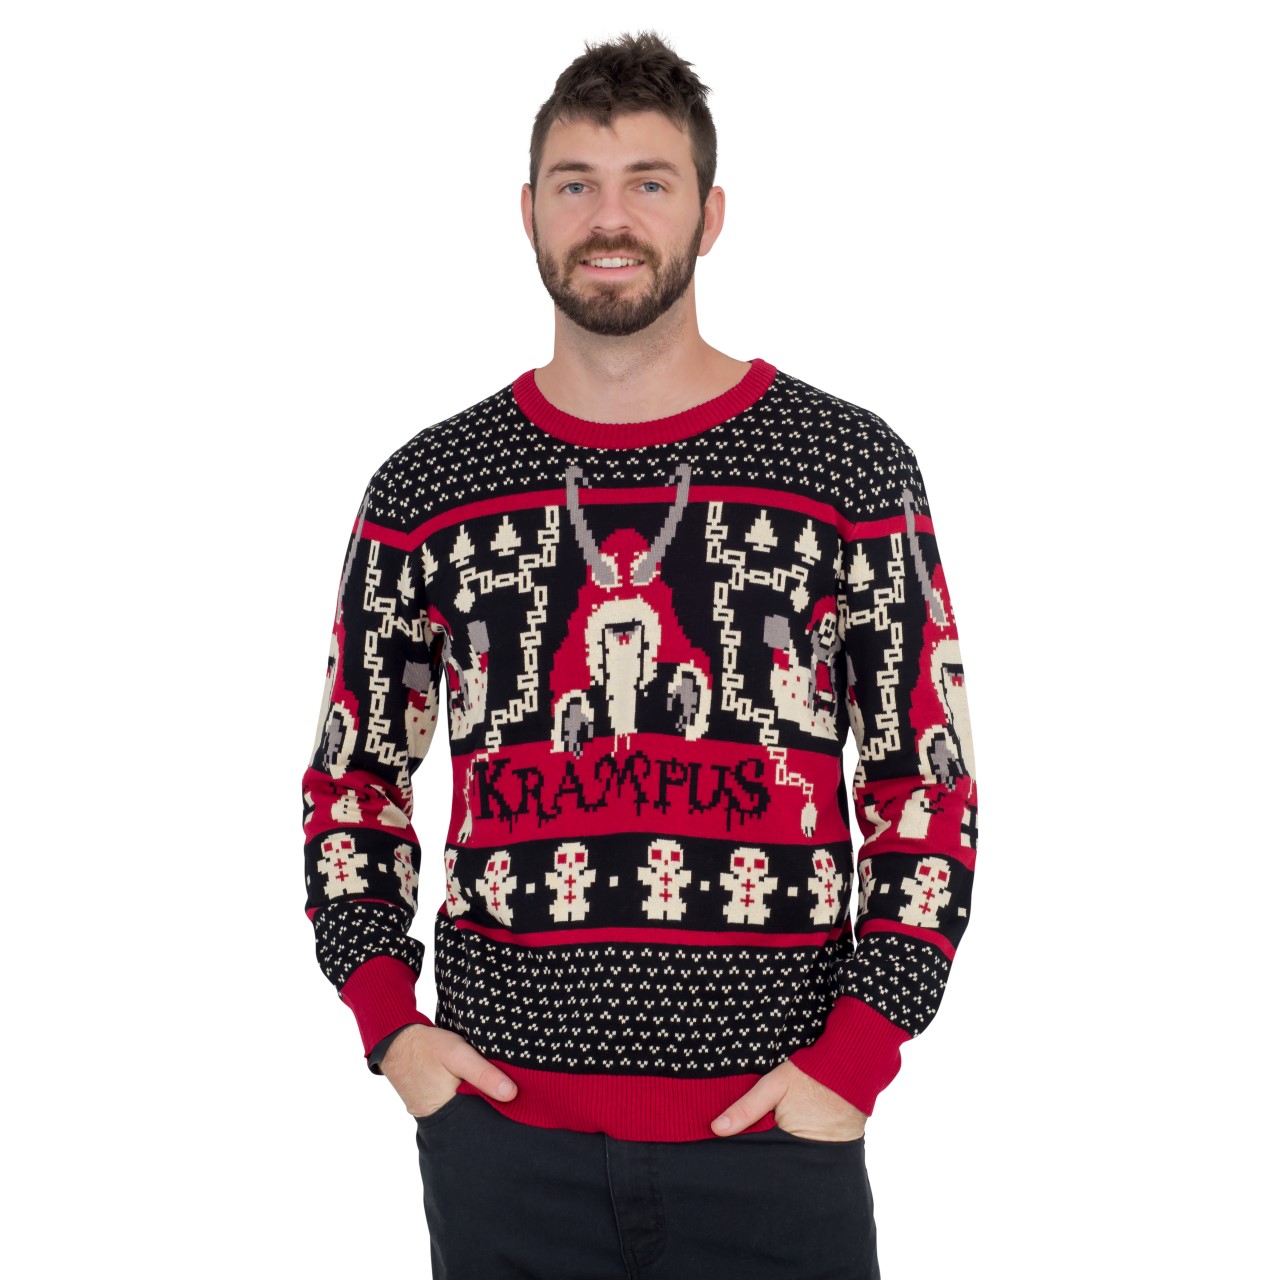 Krampus Knit Ugly Christmas Sweater,Ugly Christmas Sweaters | Funny Xmas Sweaters for Men and Women